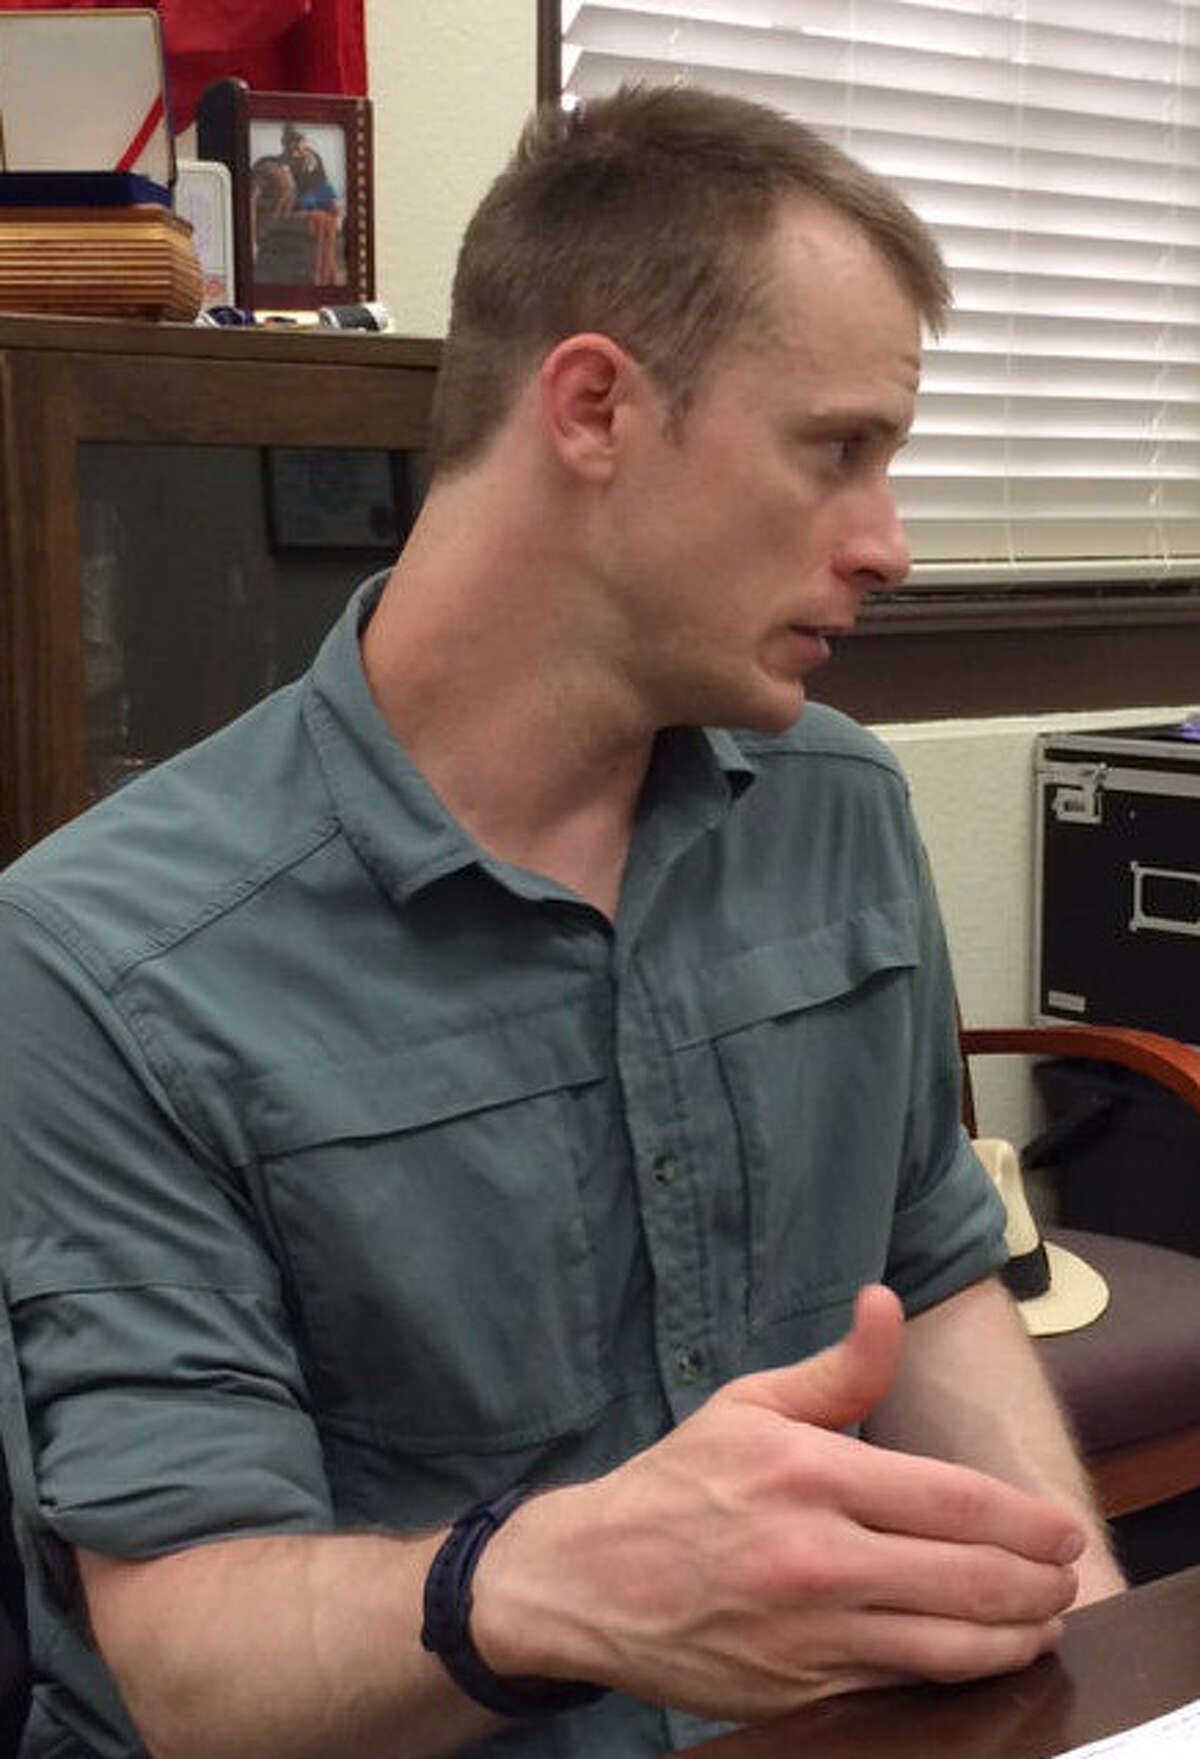 Army Sgt. Bowe Bergdahl has been at Joint Base San Antonio-Fort Sam Houston.